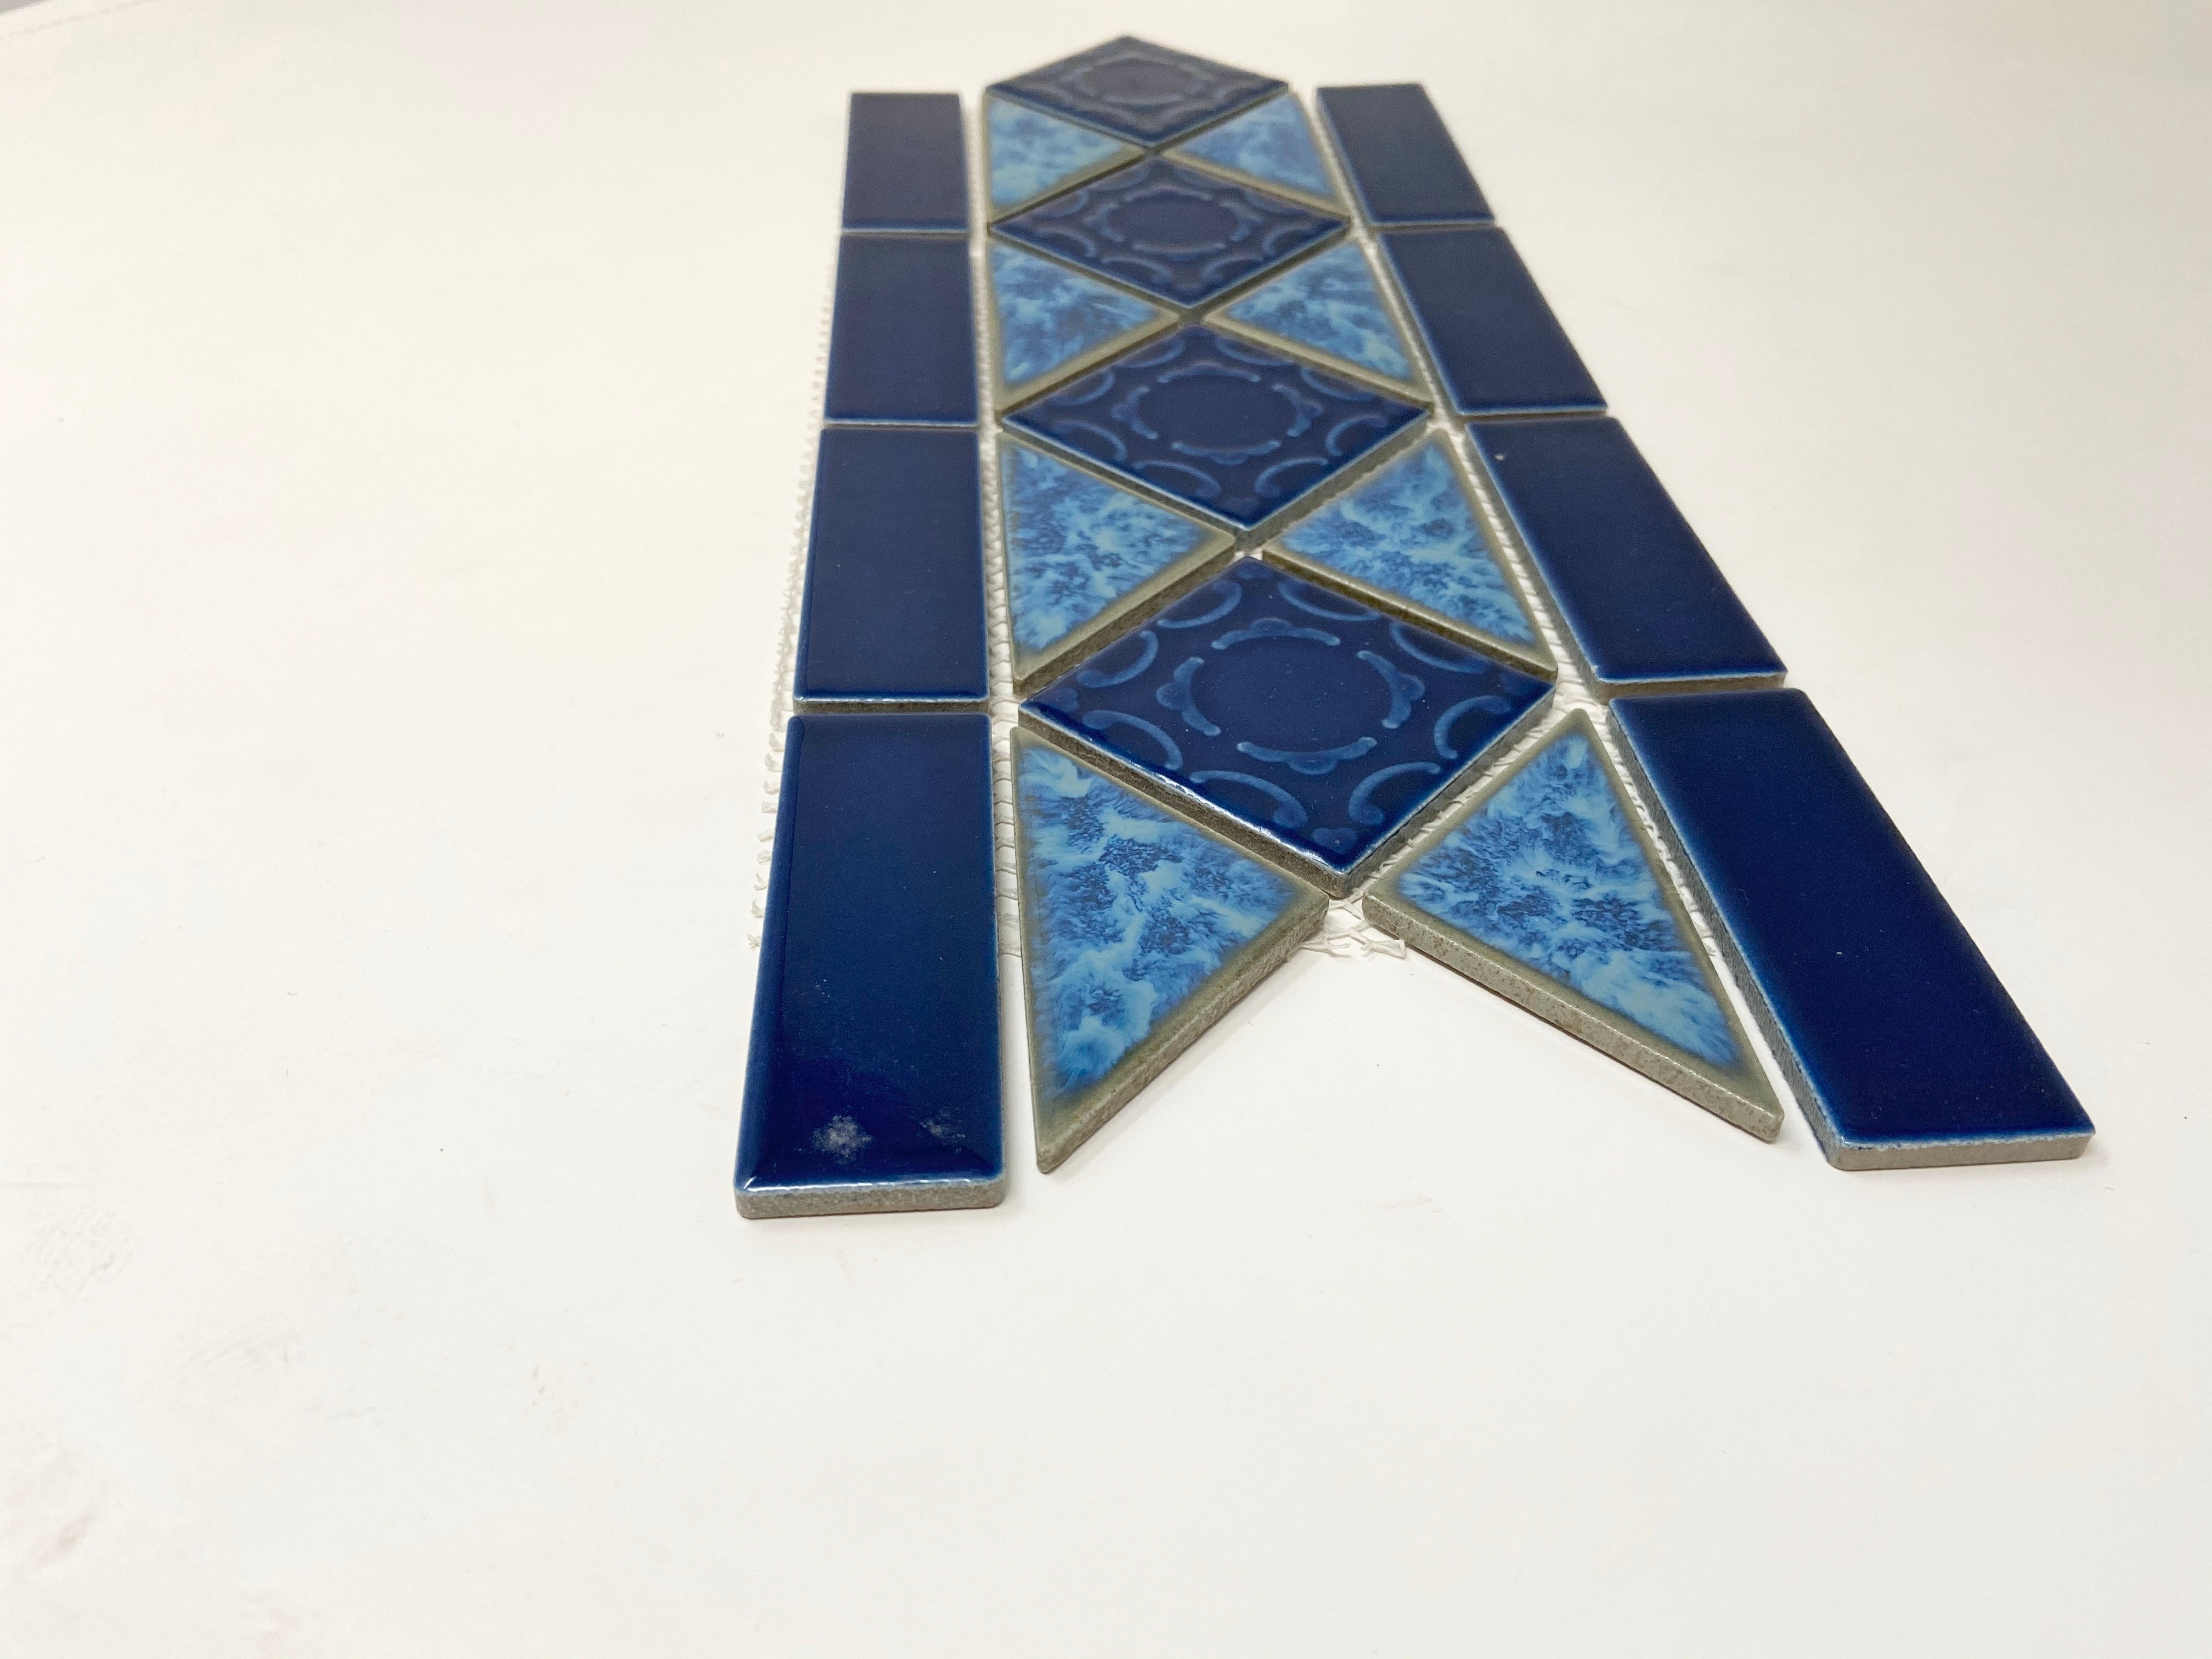 Cobalt Blue Porcelain Pattern LineUp for Pool Wall Tile and bathroom Walls